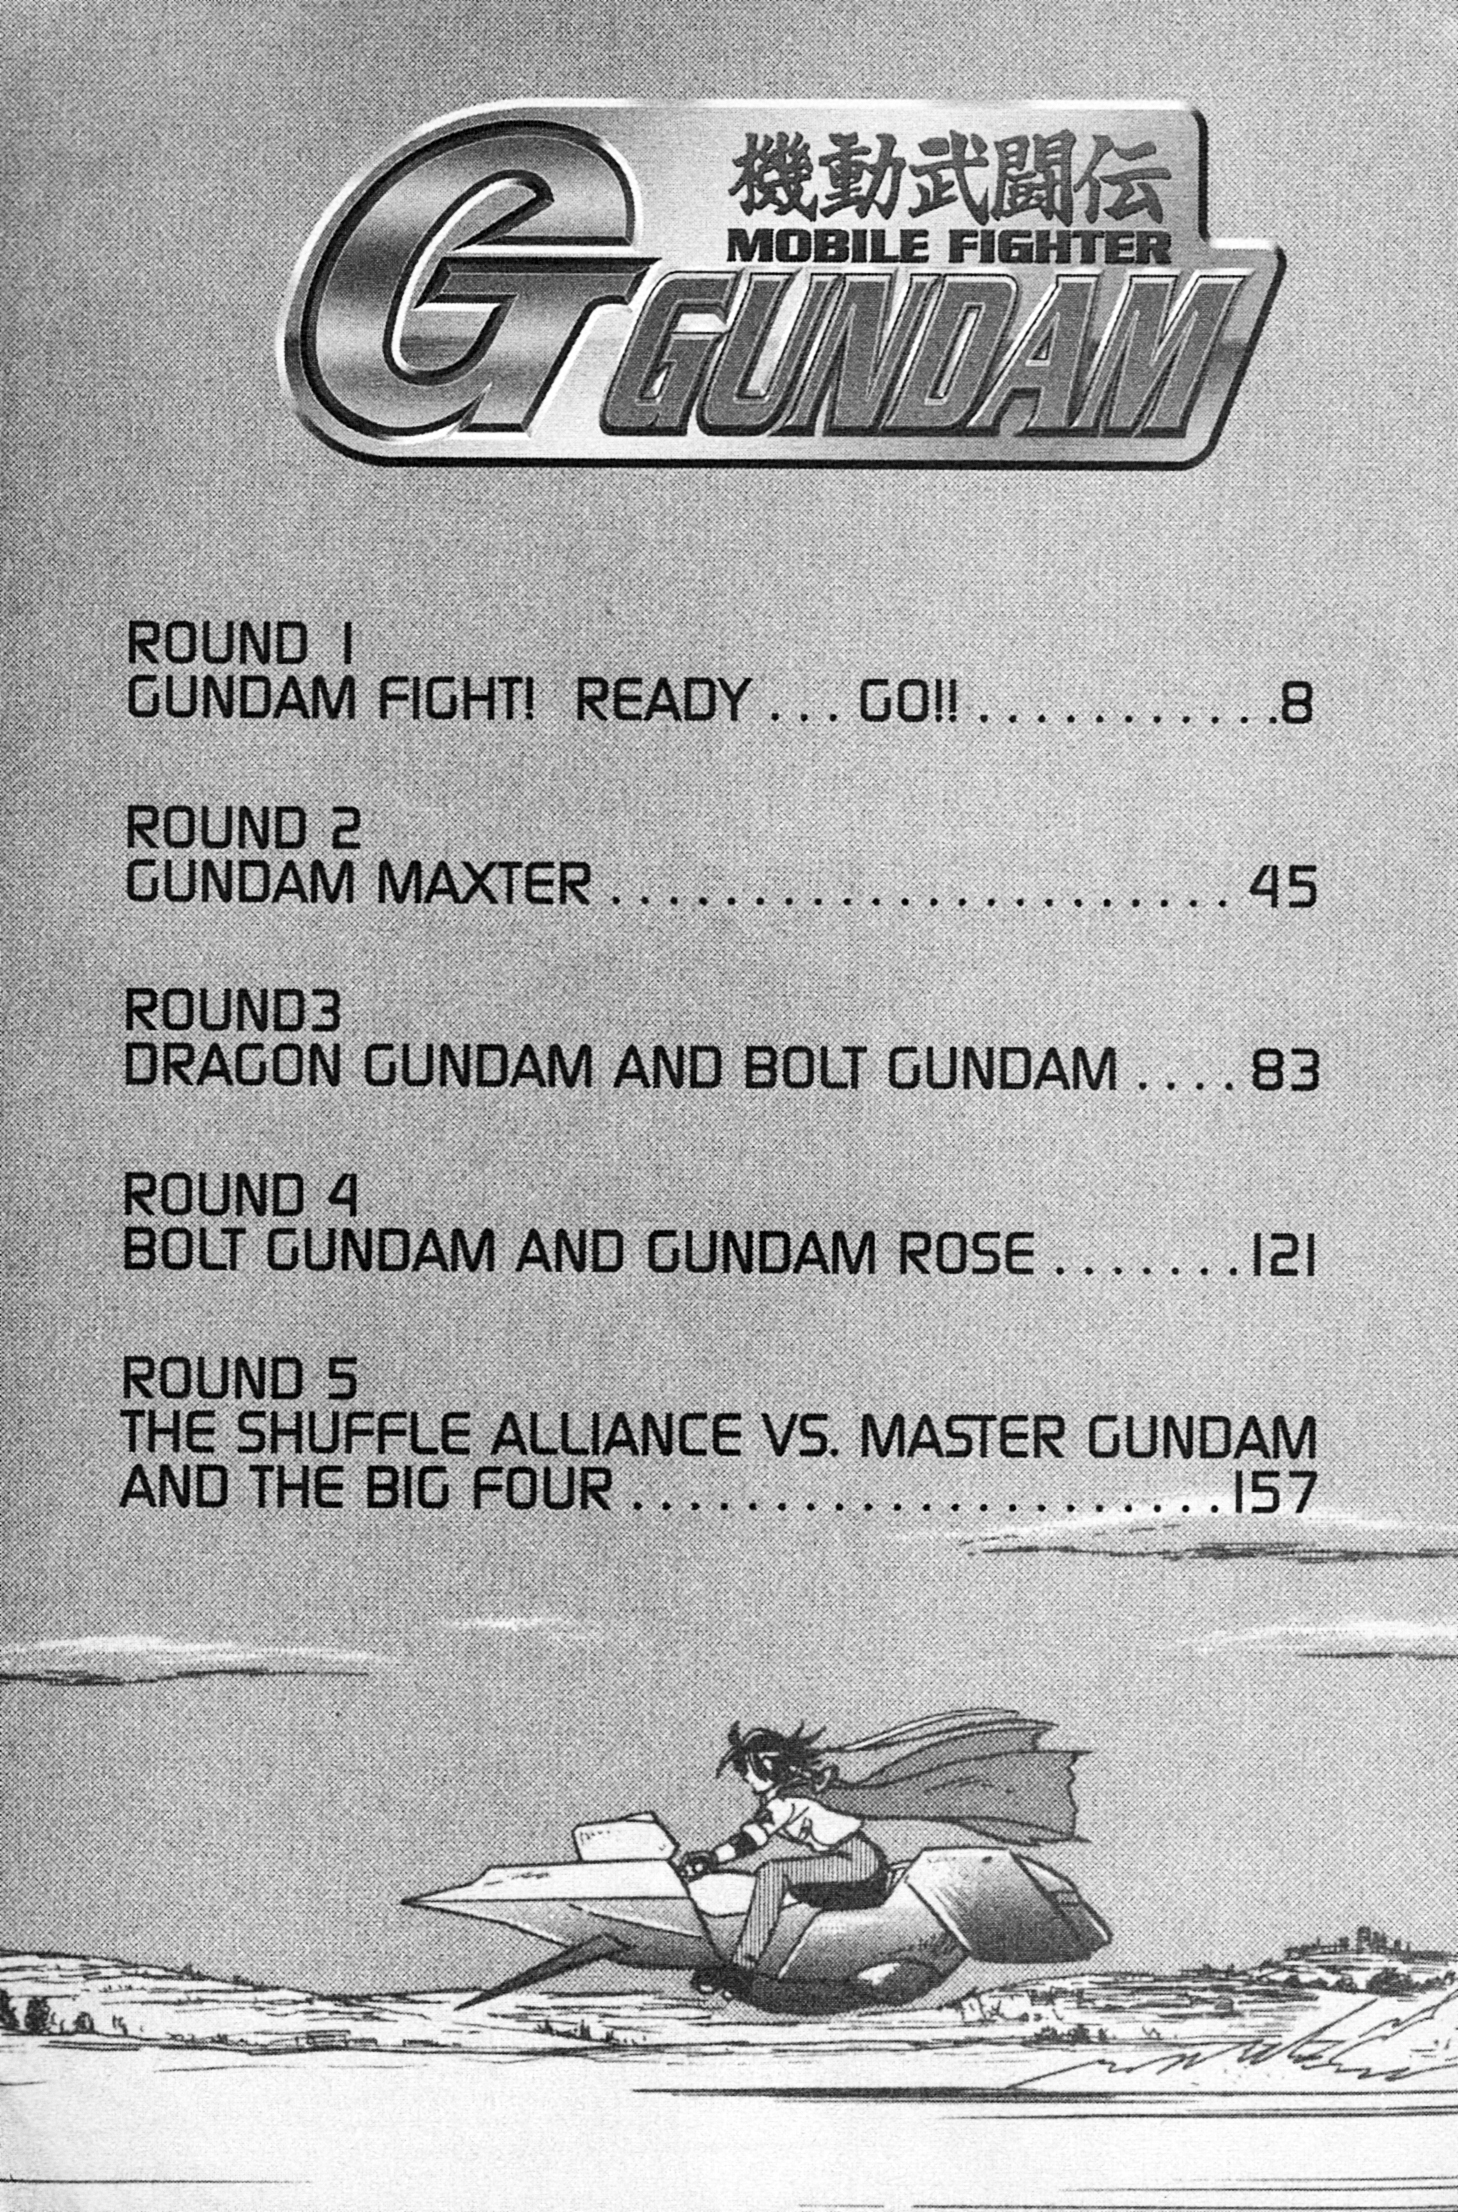 Mobile Fighter G Gundam Vol.1 Chapter 1: Gundam Fight! Ready... Go!! - Picture 3